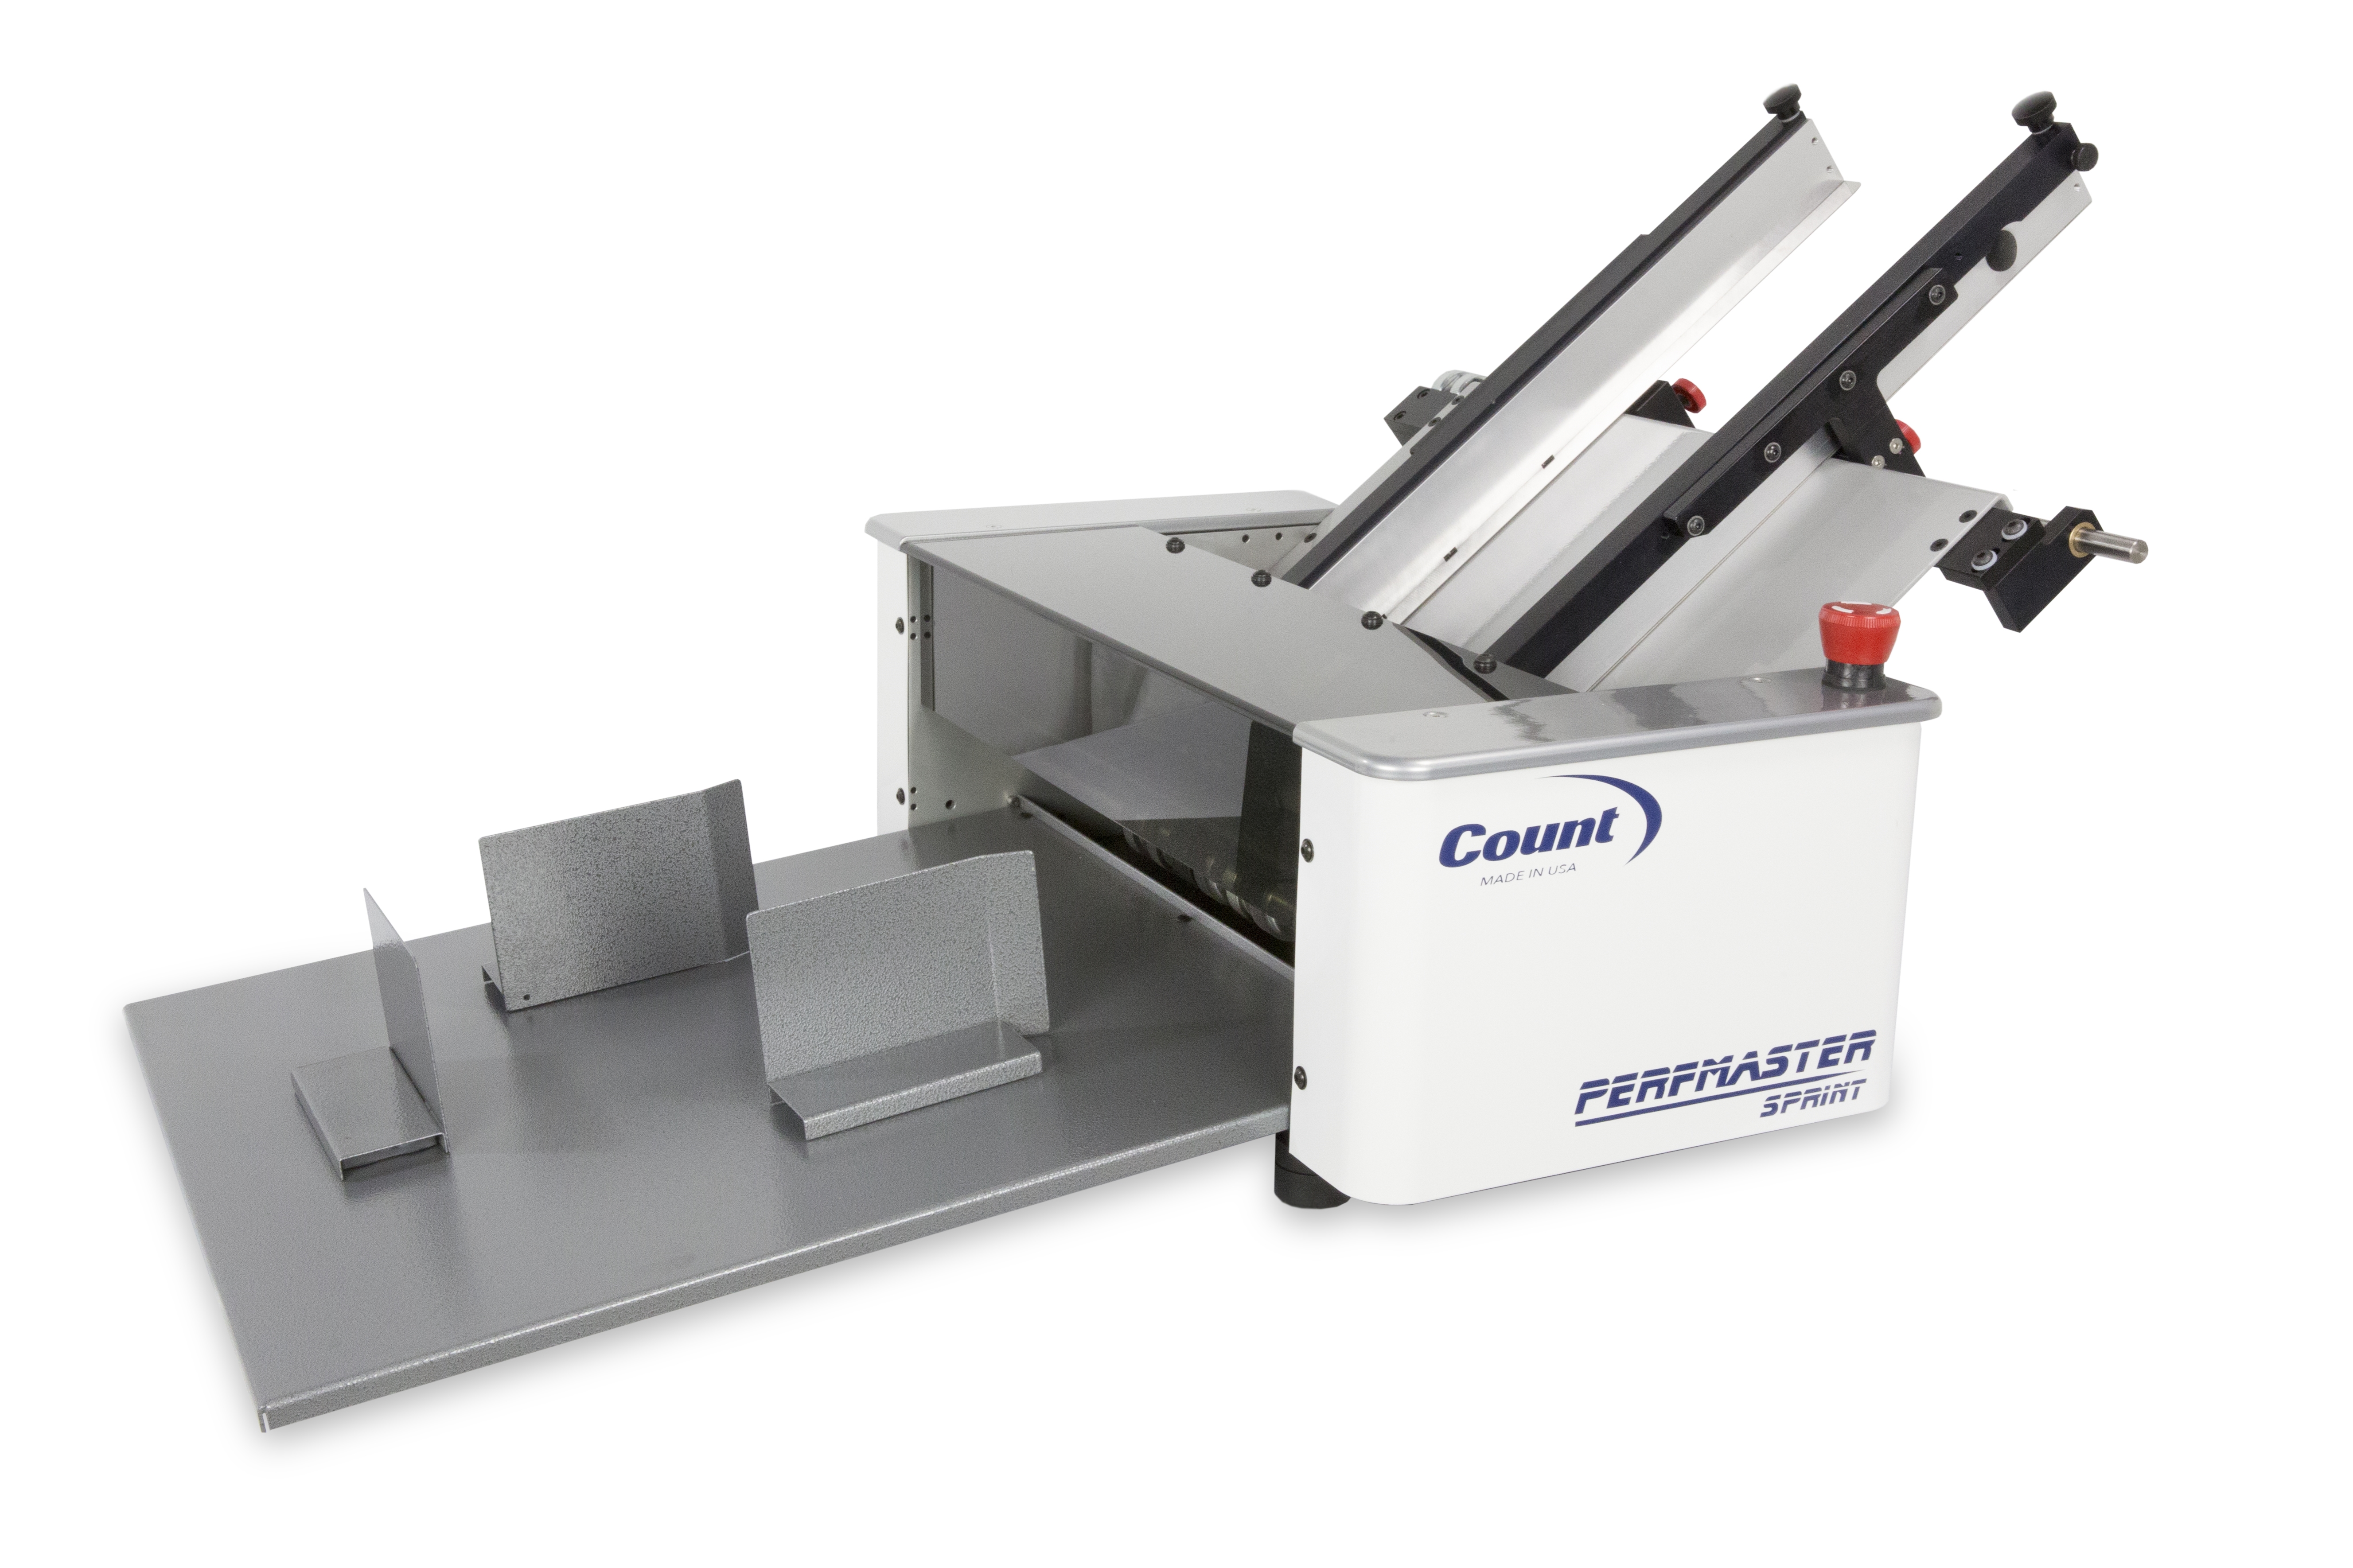 COUNT PMS Paper Perforator and Scorer PerfMaster Sprint